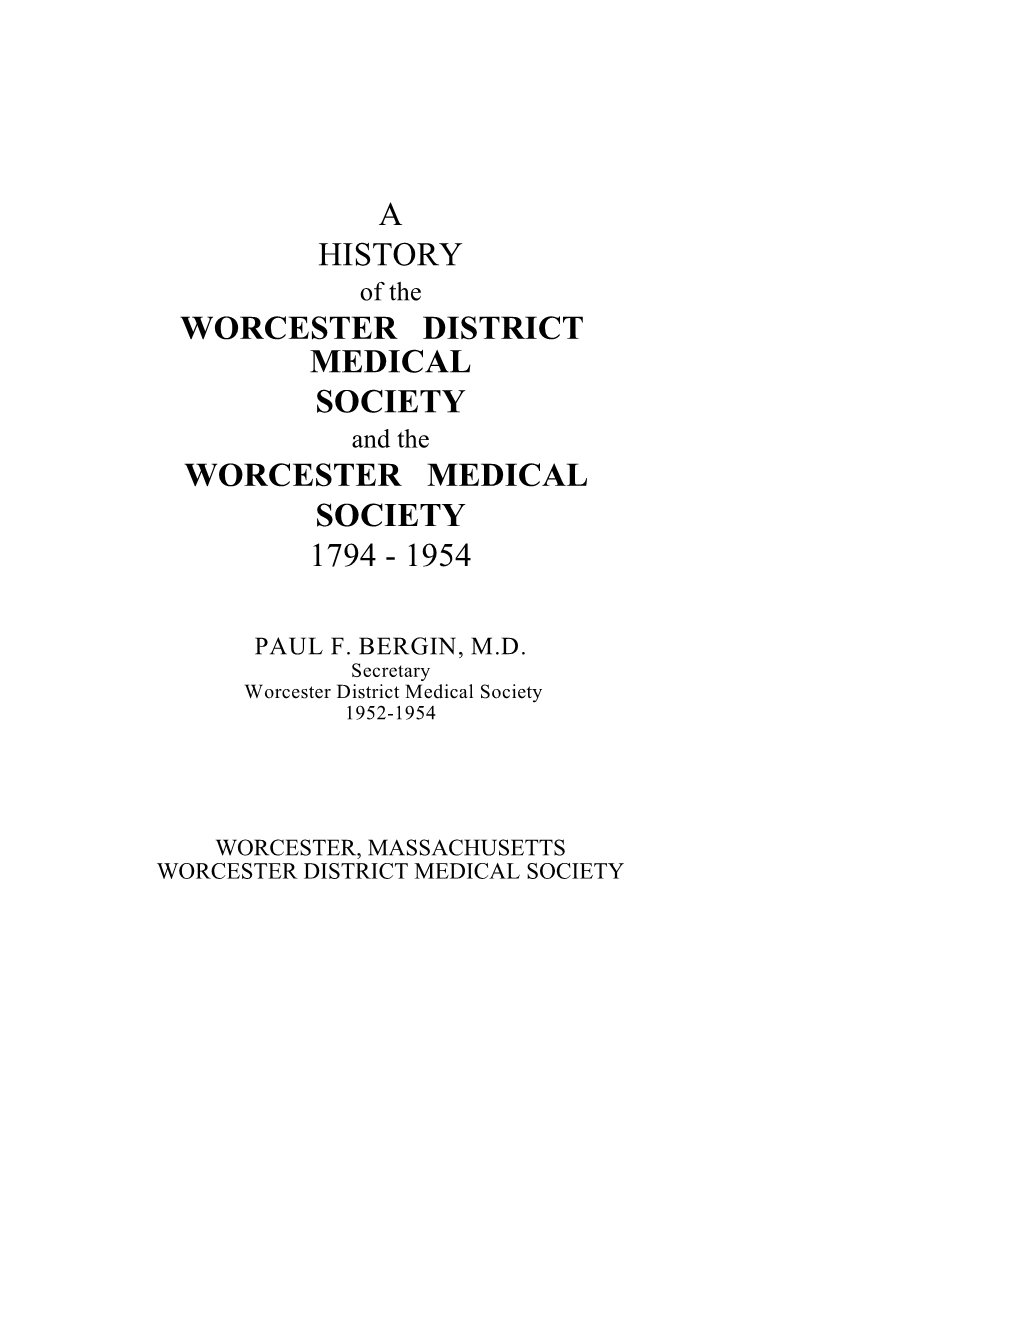 A HISTORY of the WORCESTER DISTRICT MEDICAL SOCIETY and the WORCESTER MEDICAL SOCIETY 1794 - 1954